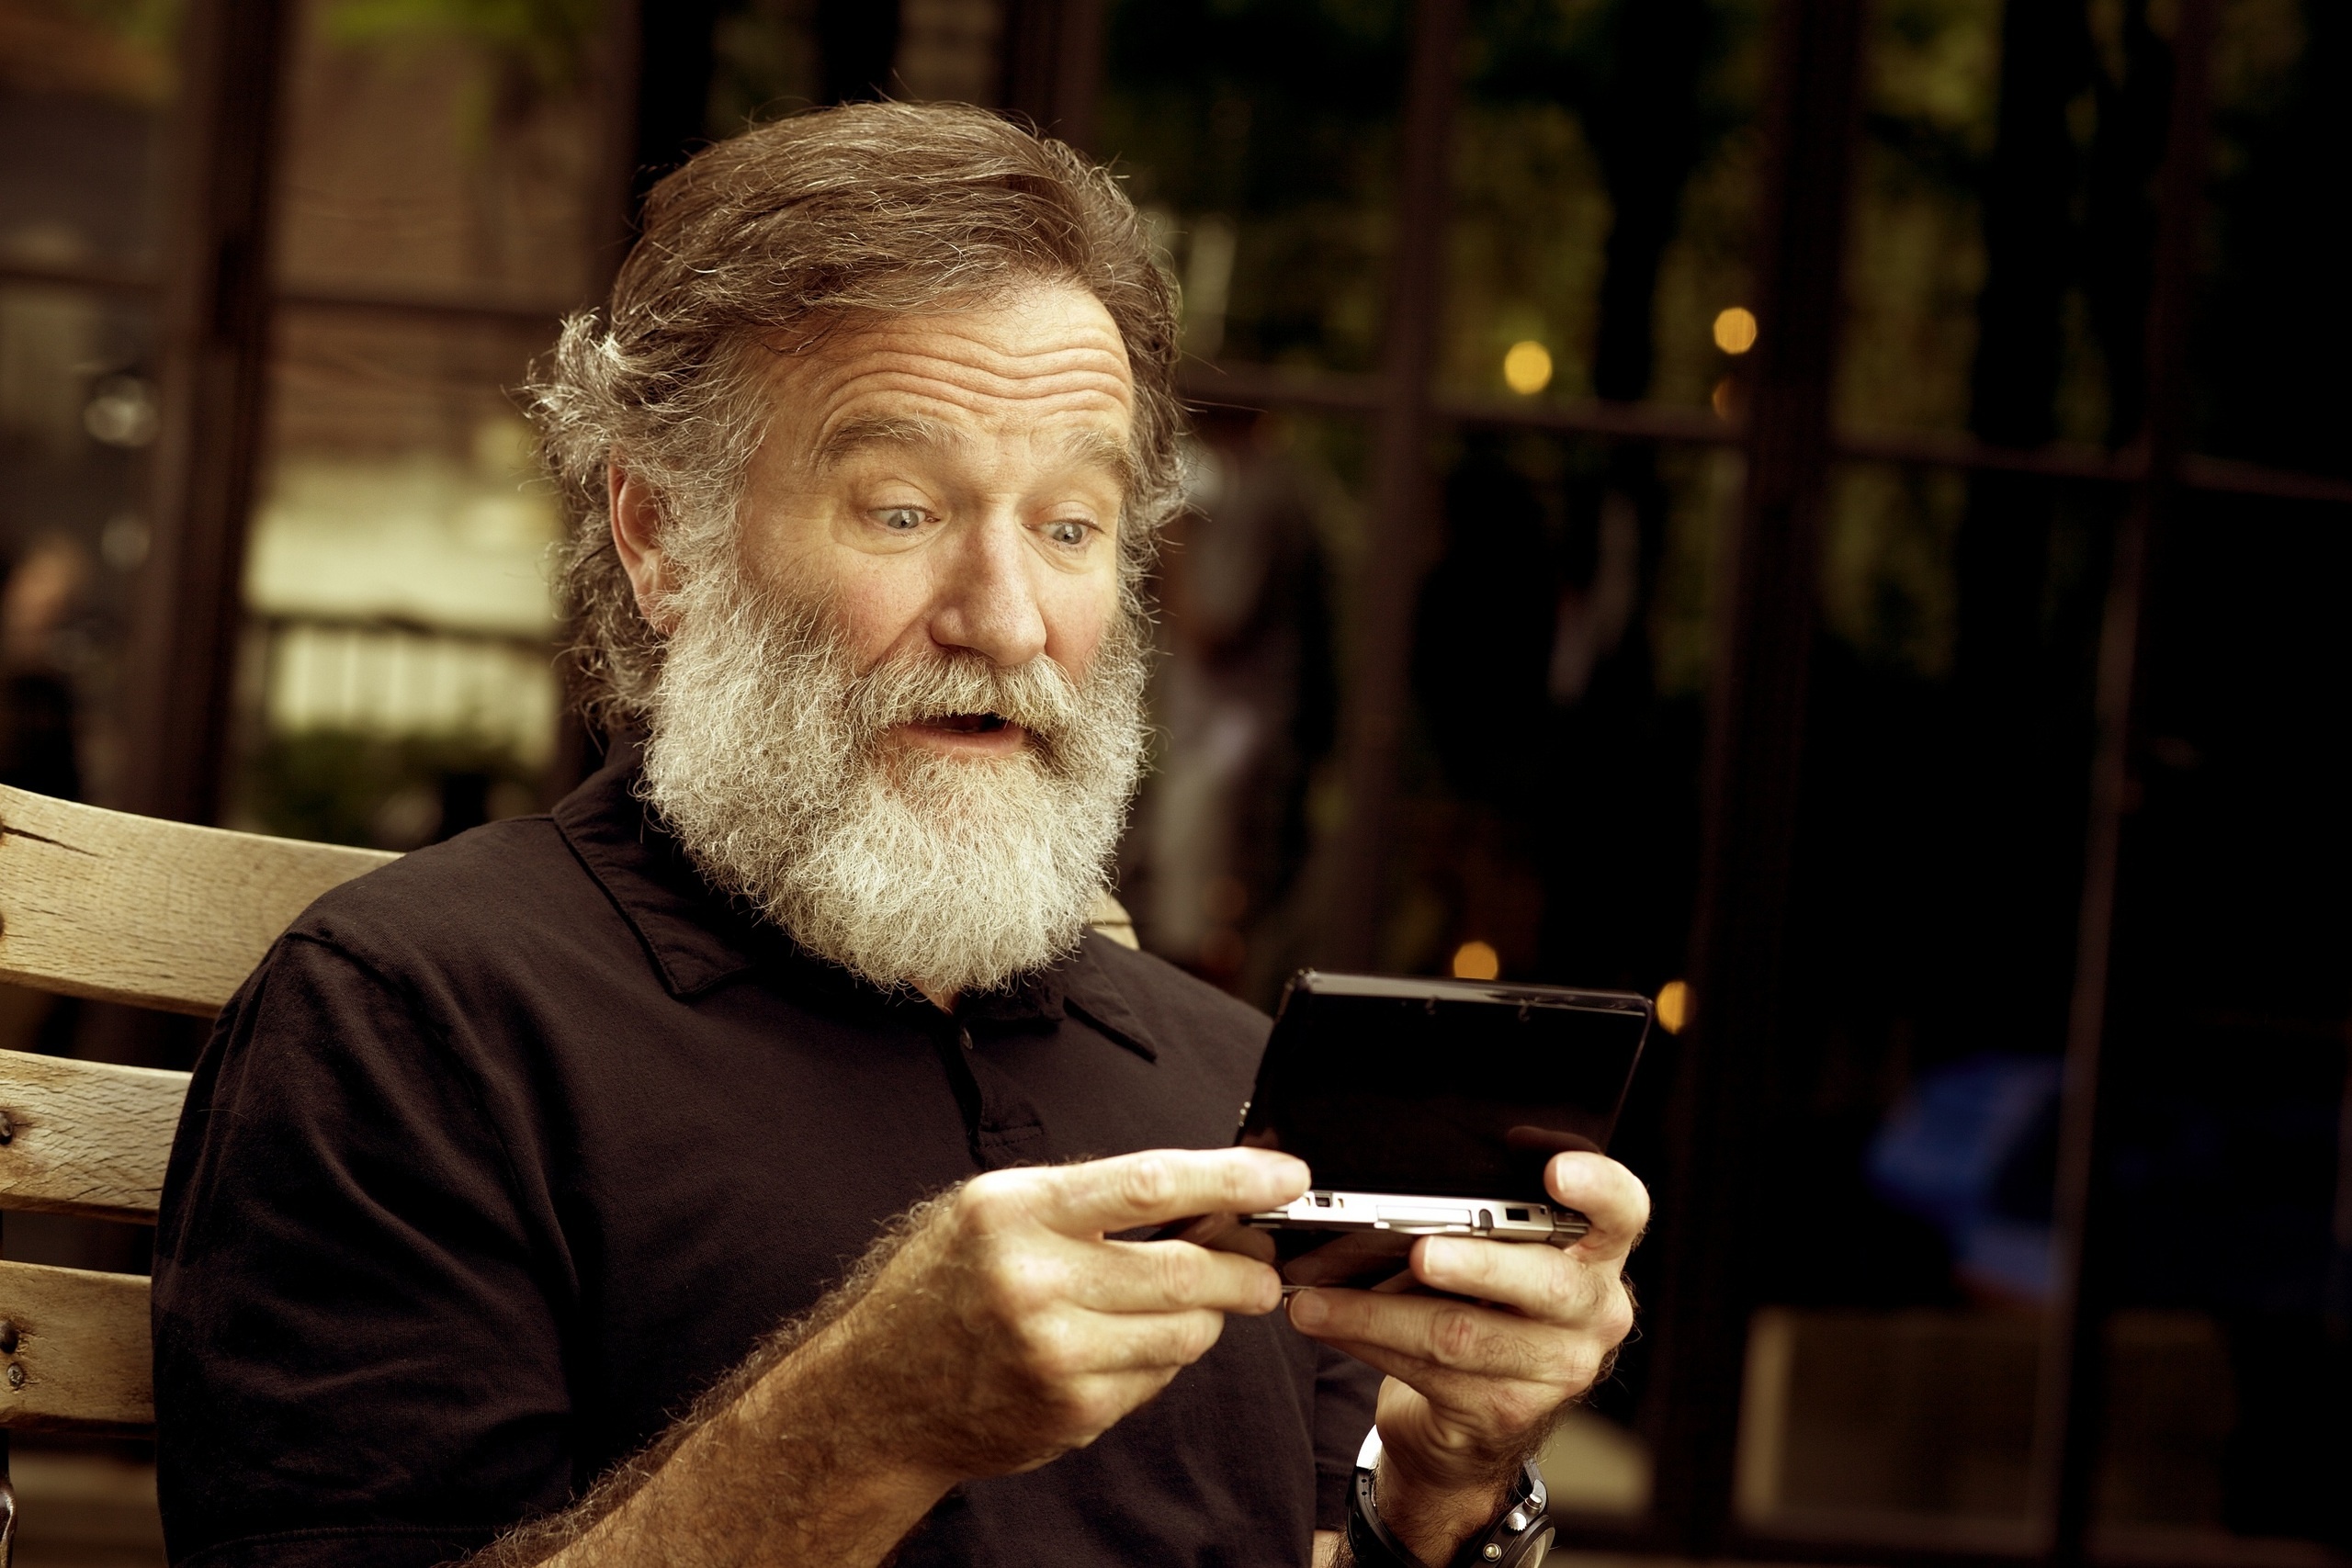 Robin Williams: Released several comedy albums including Reality ... What a Concept in 1980. 2560x1710 HD Wallpaper.